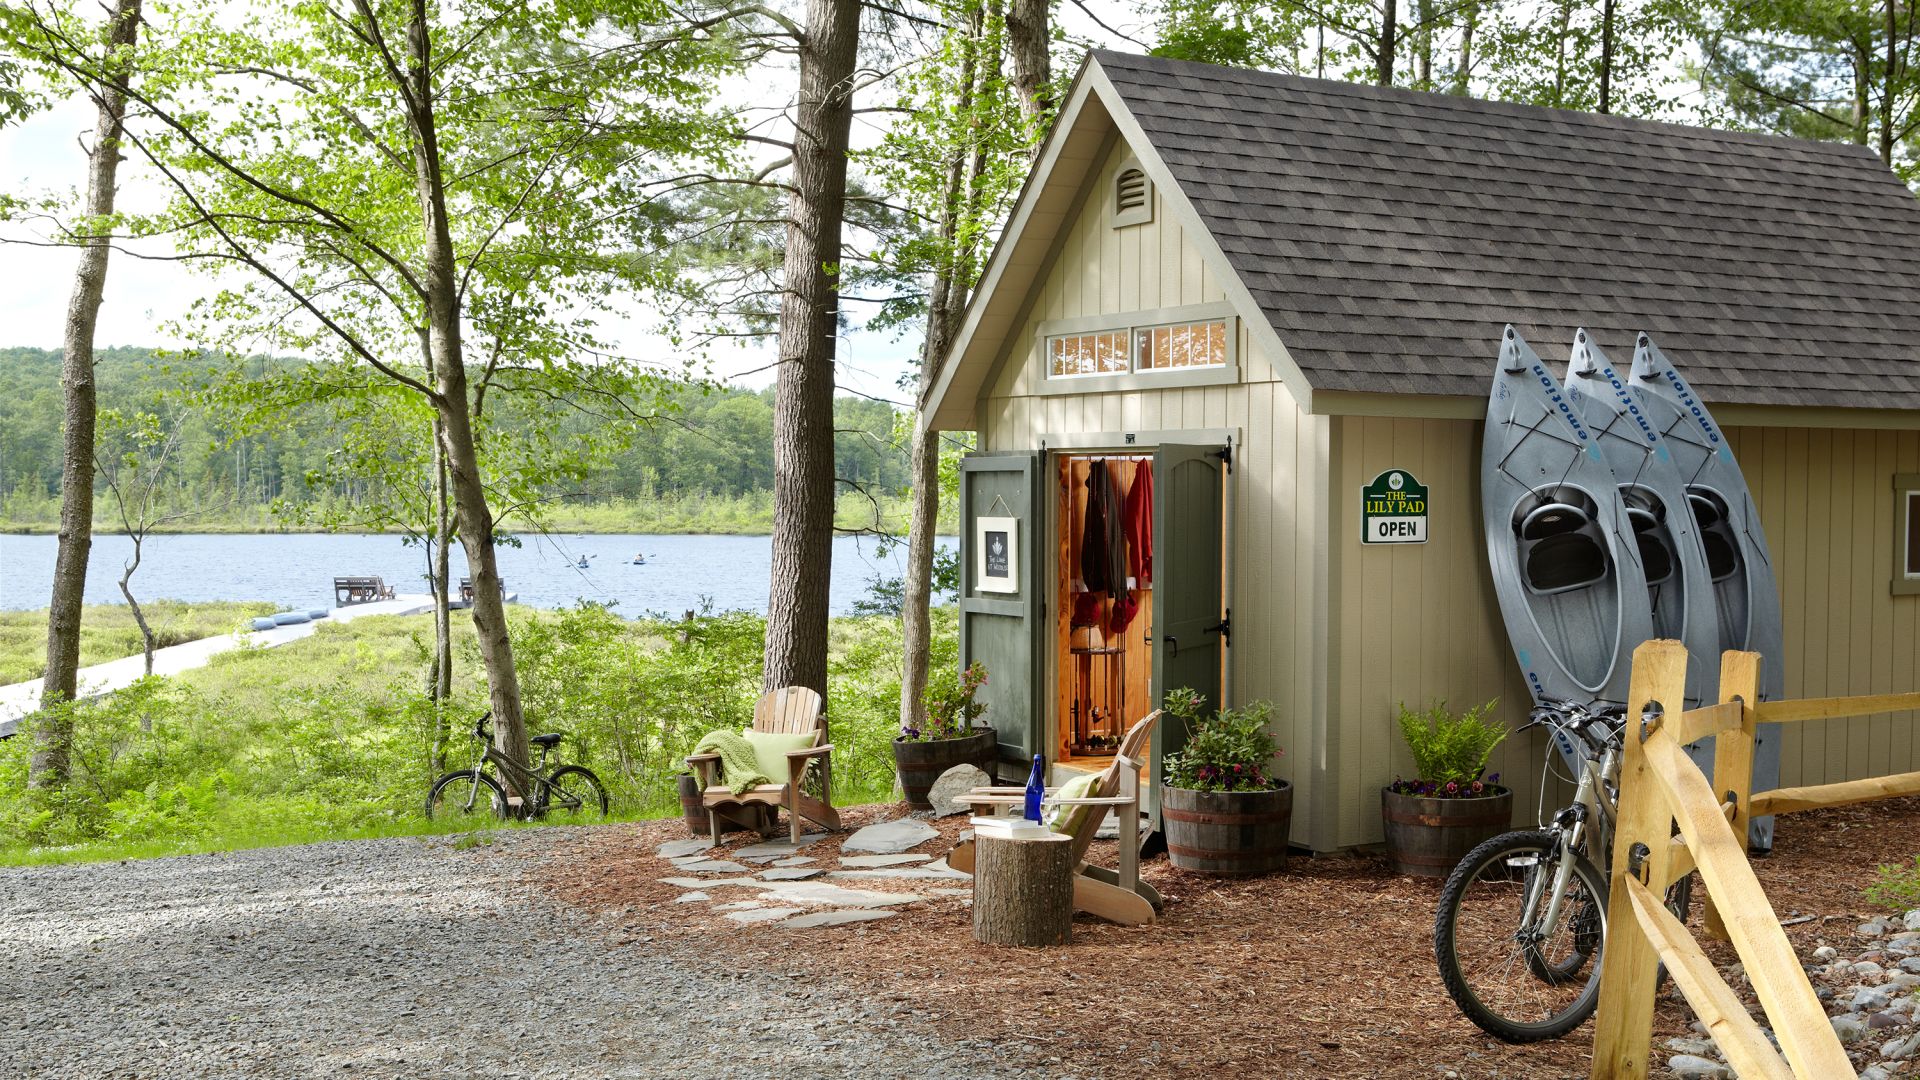 Building with open doors and kayaks, bikes, and outdoor adventure equipment available for use next to the lake